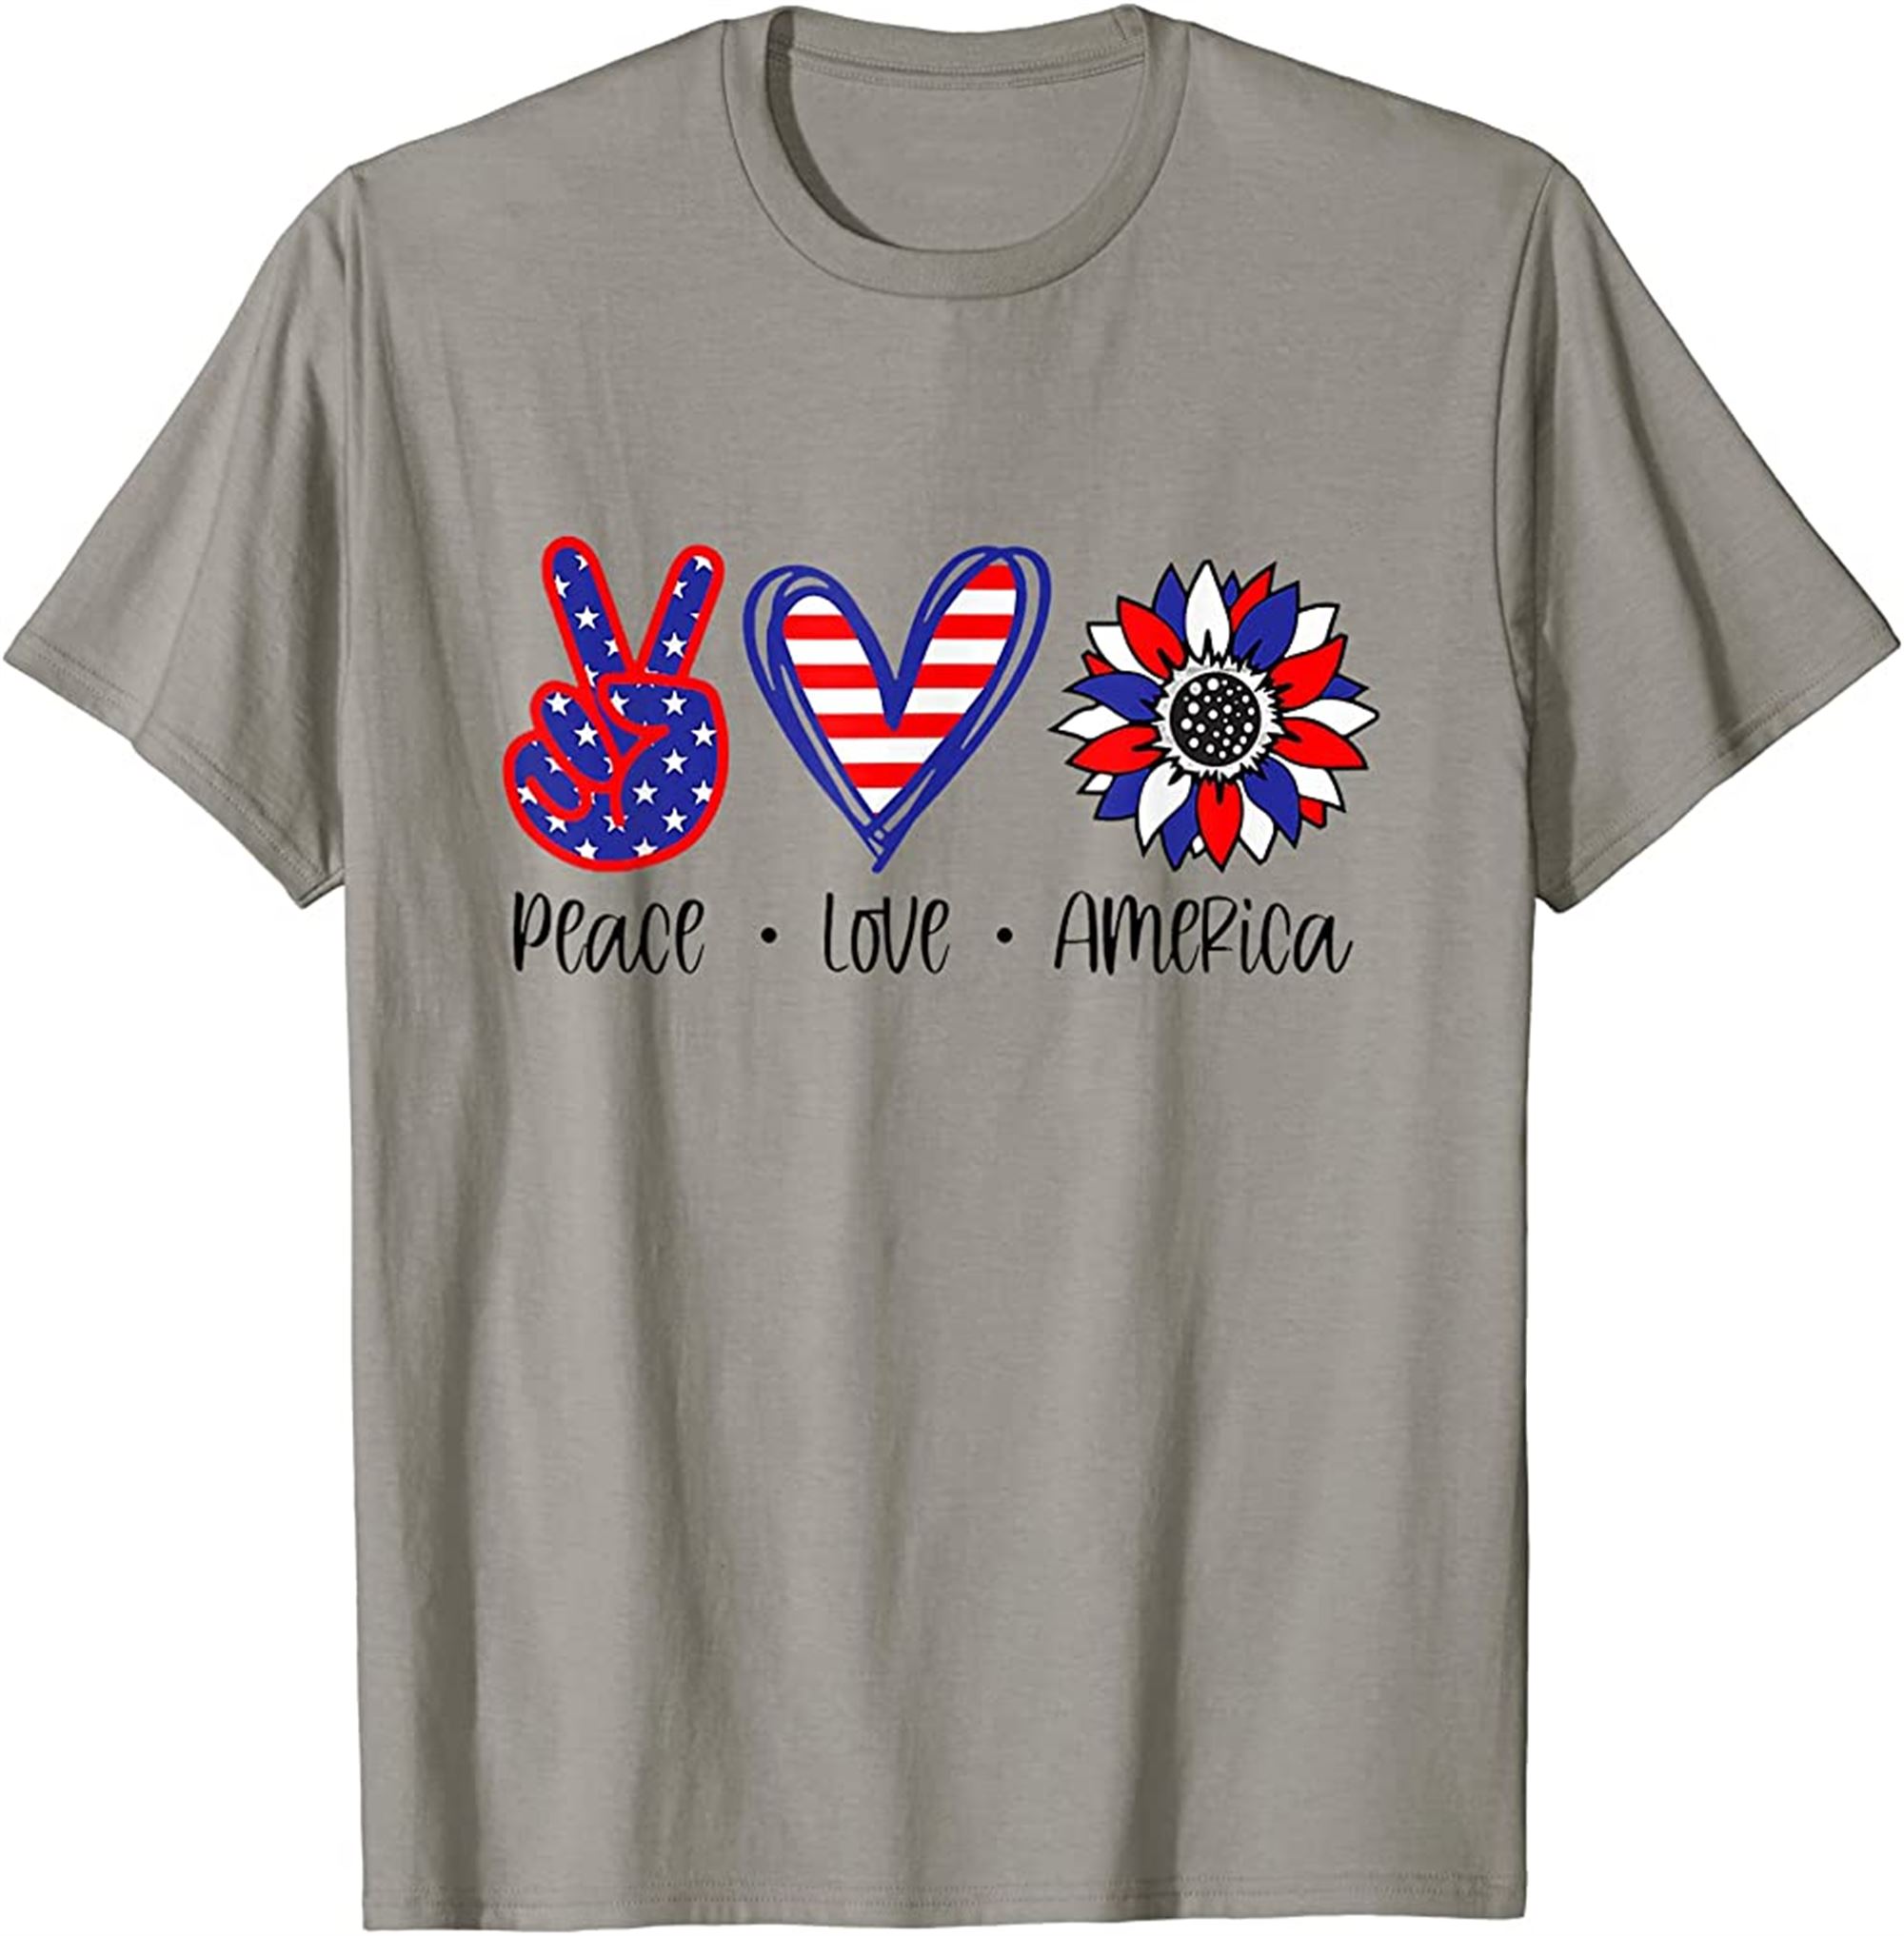 Peace Love America Sunflower Hippie Usa Flag 4th Of July T-shirt Size Up To 5xl